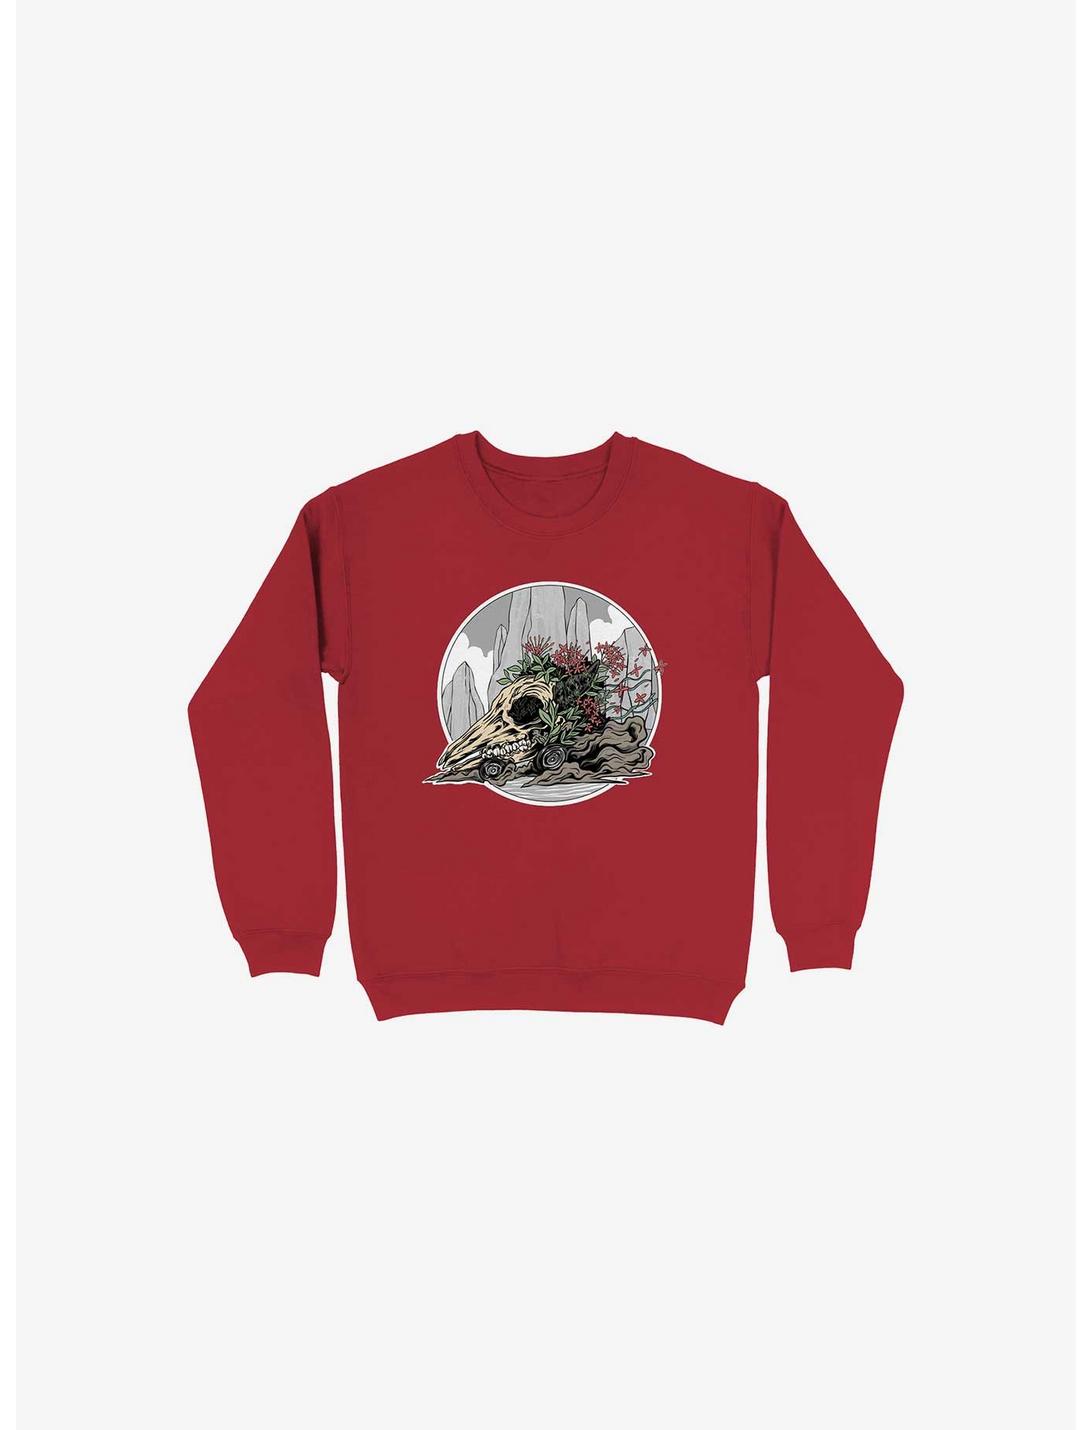 Race The Time Skull Red Sweatshirt, RED, hi-res